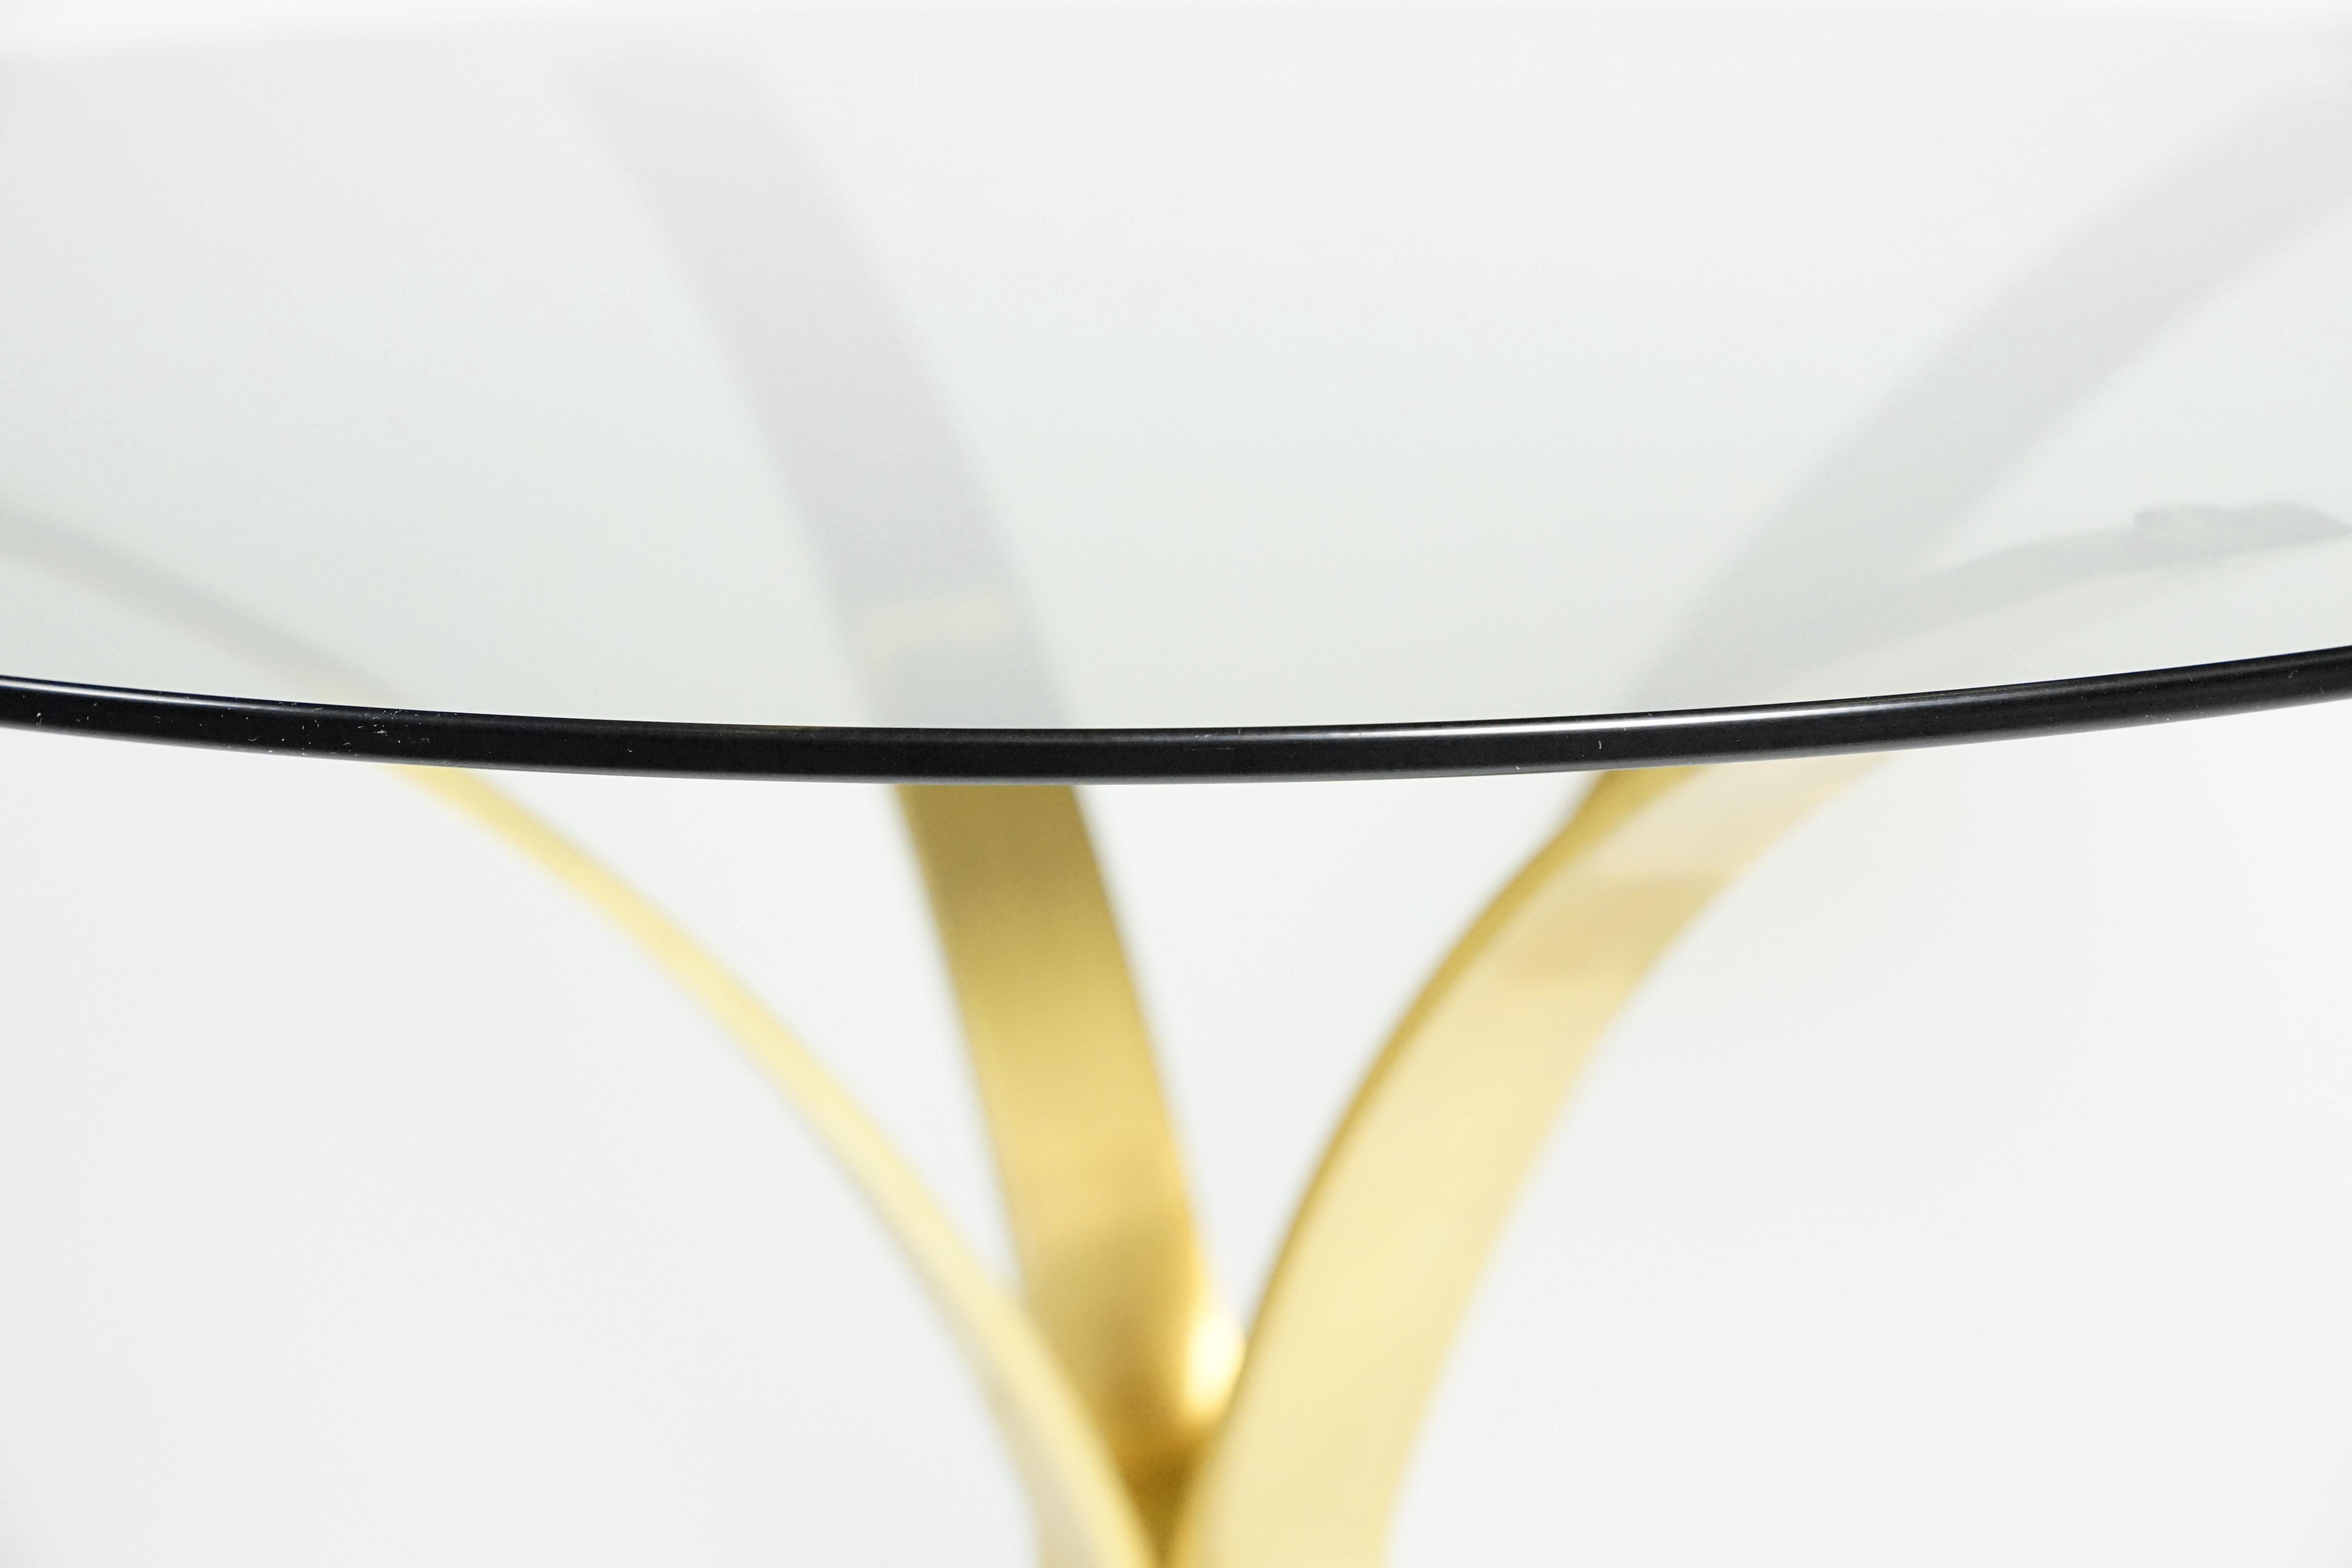 Glass table by Roger Sprunger for Dunbar, 1960s.
This wonderful piece of table has brass-plated curved legs and a round glass plate on top. Minor signs of use.